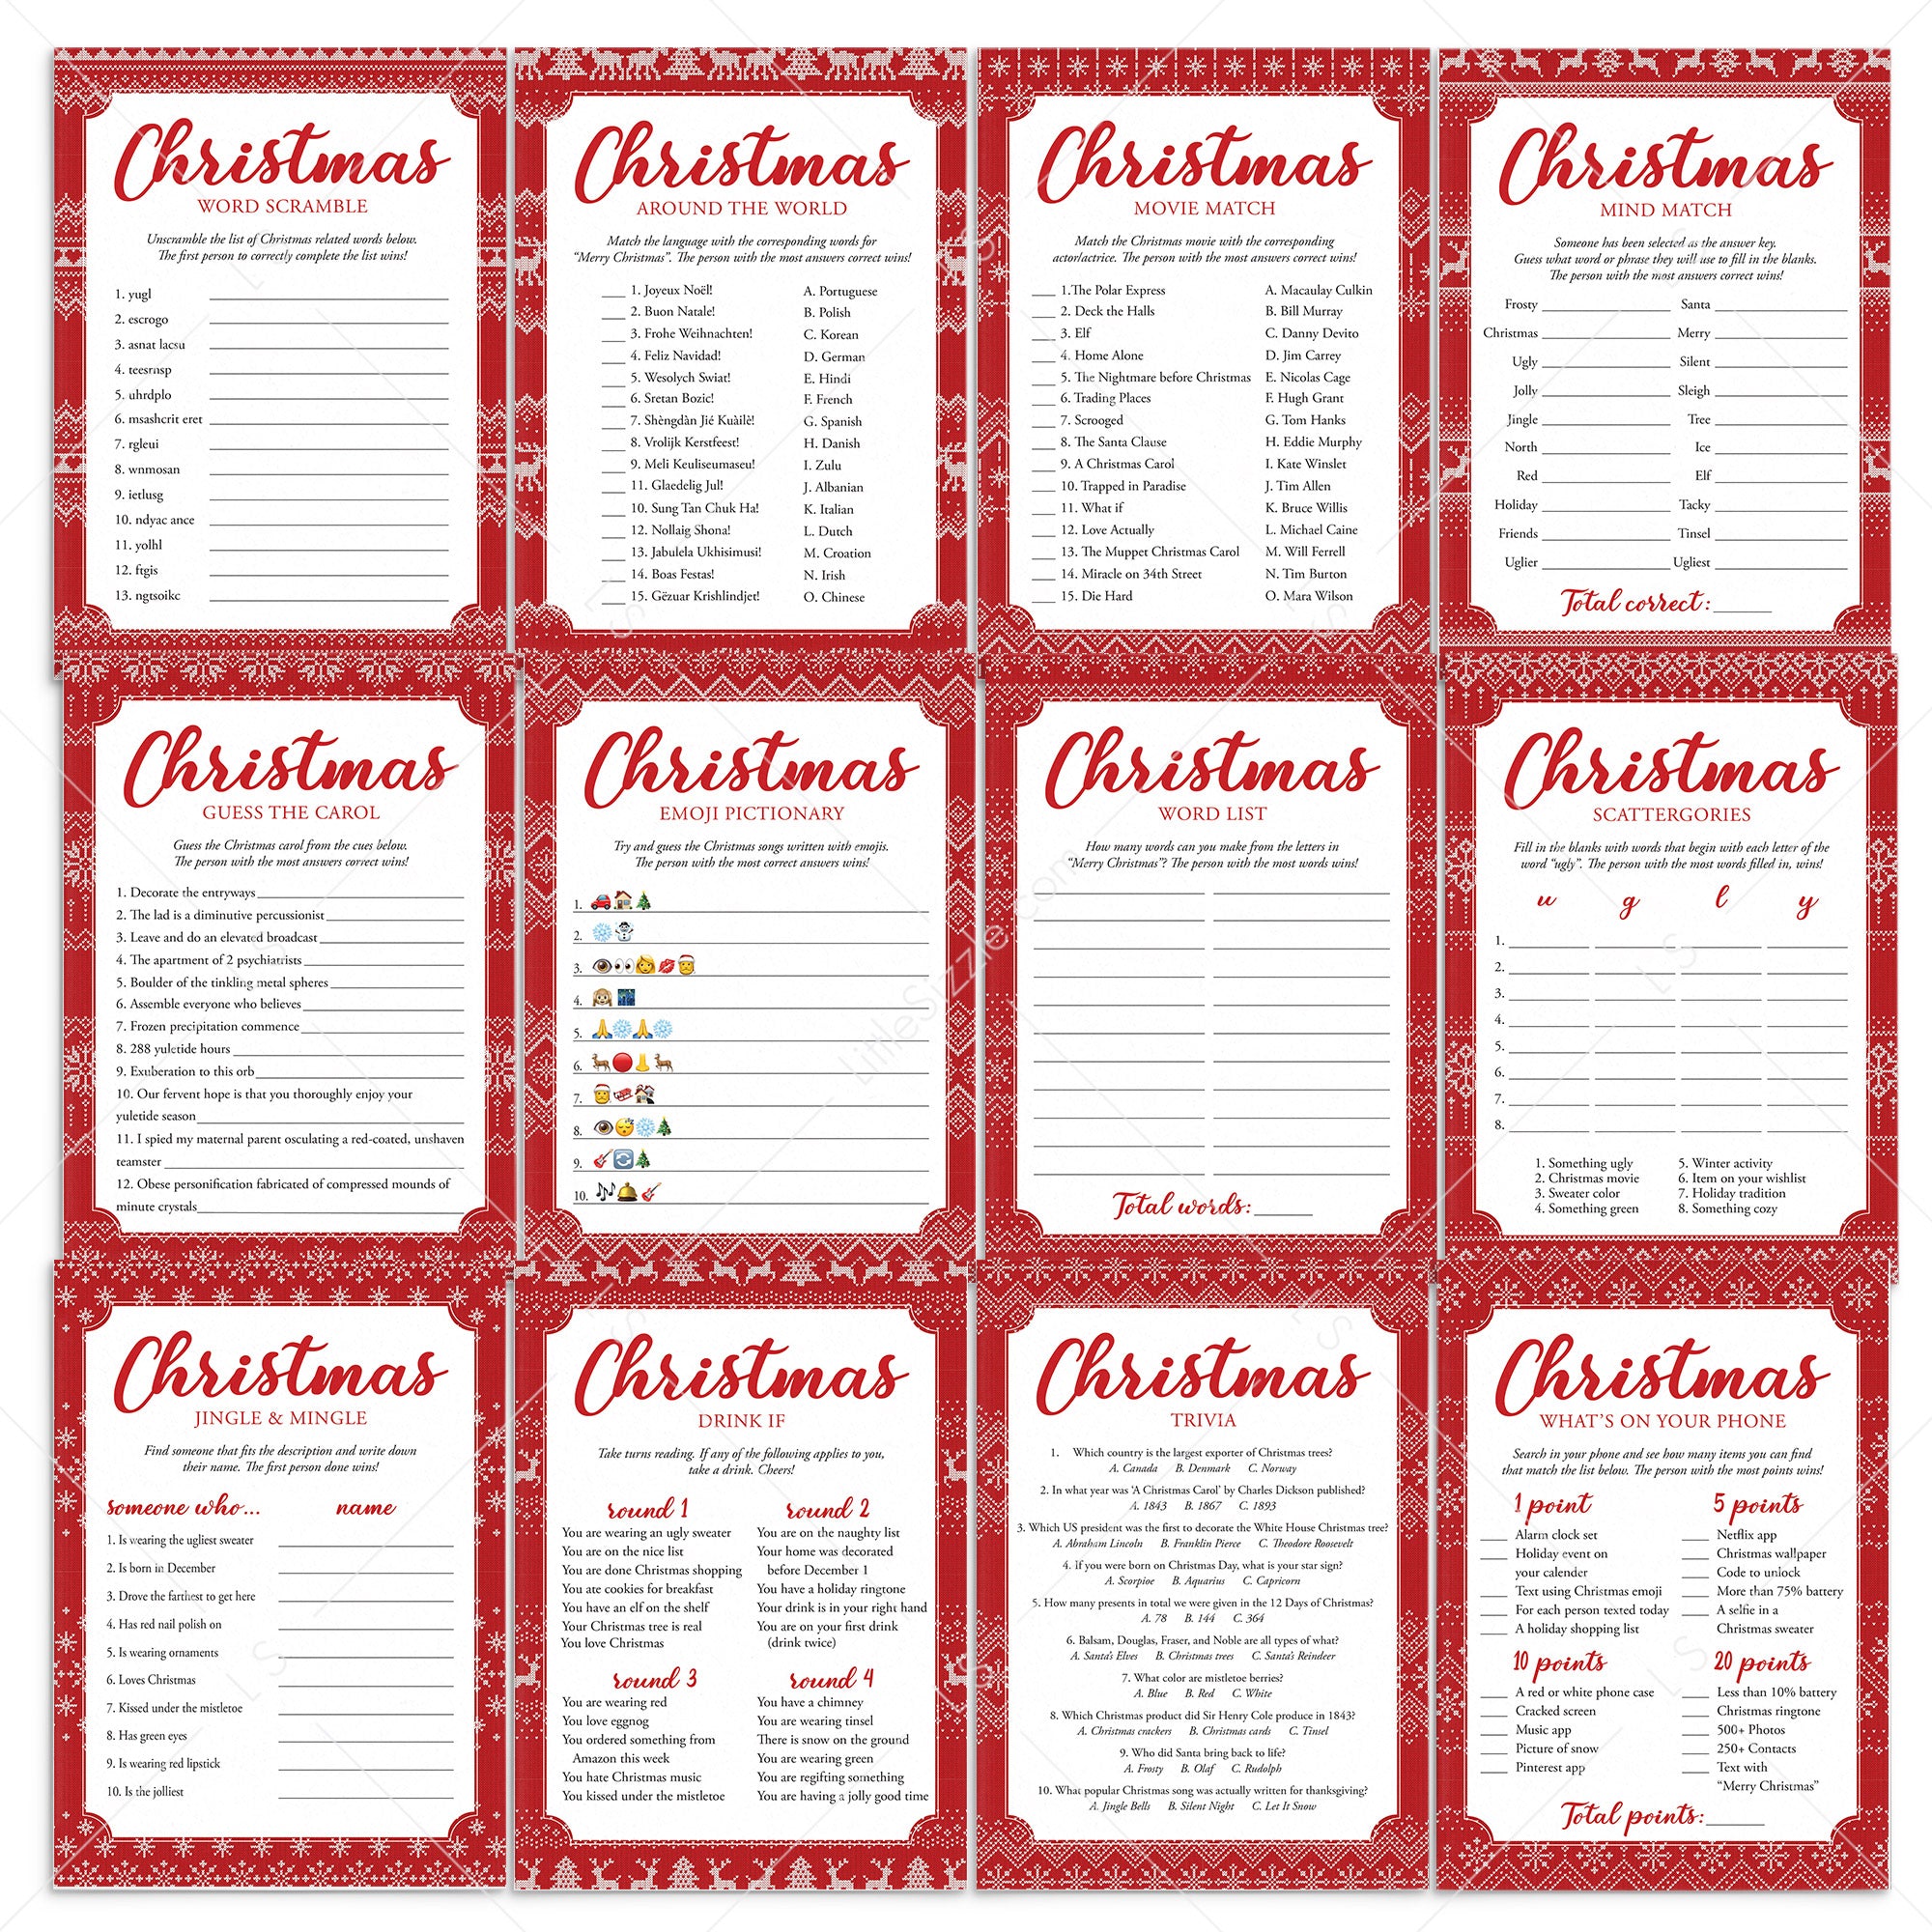 Printable Christmas Party Games with Knitted Sweater Pattern by LittleSizzle